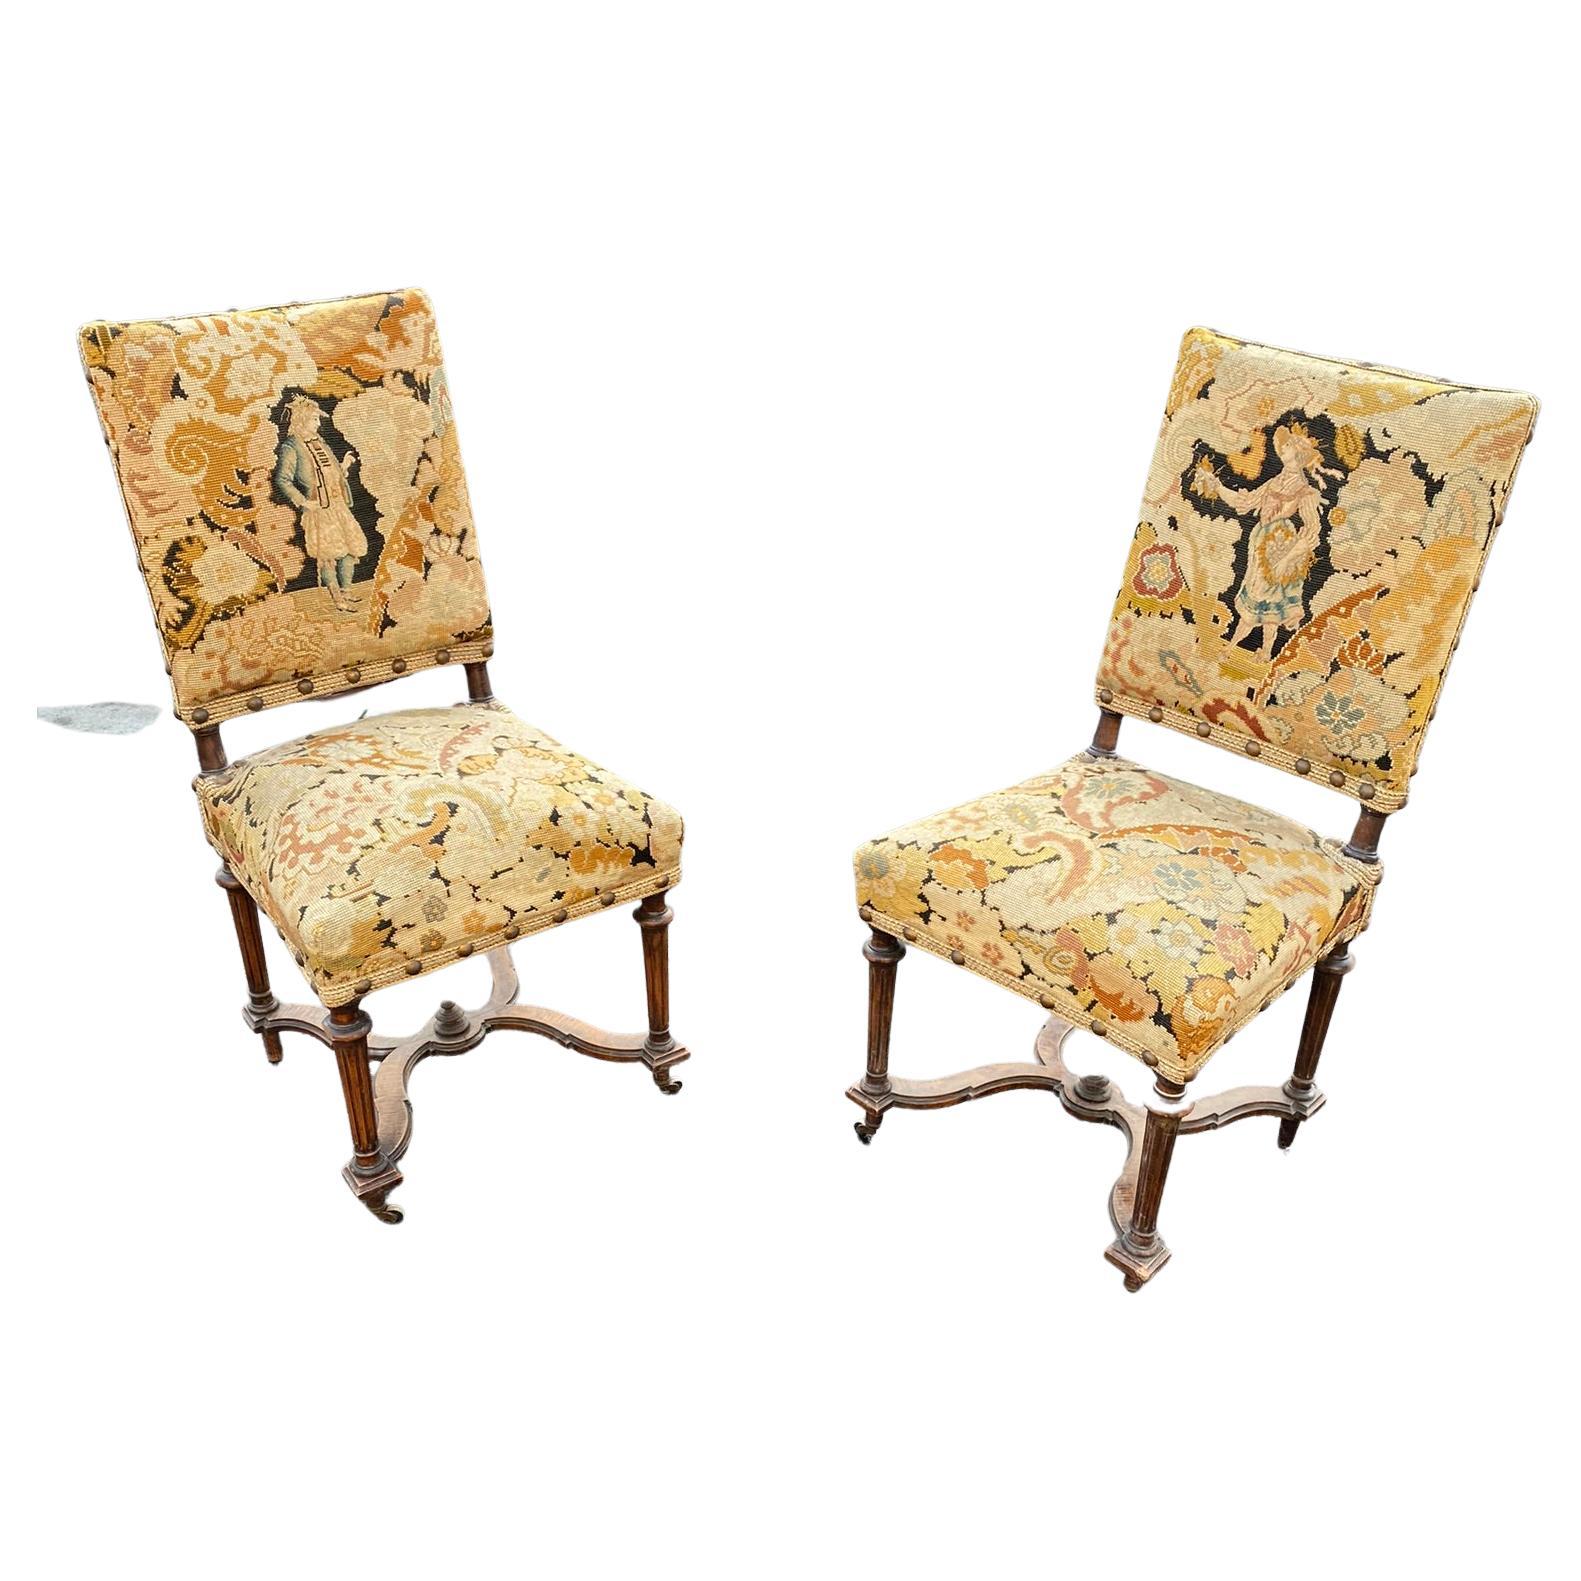 2 Henri 2 Style Chairs, with Beautiful Tapestries circa 1900 For Sale